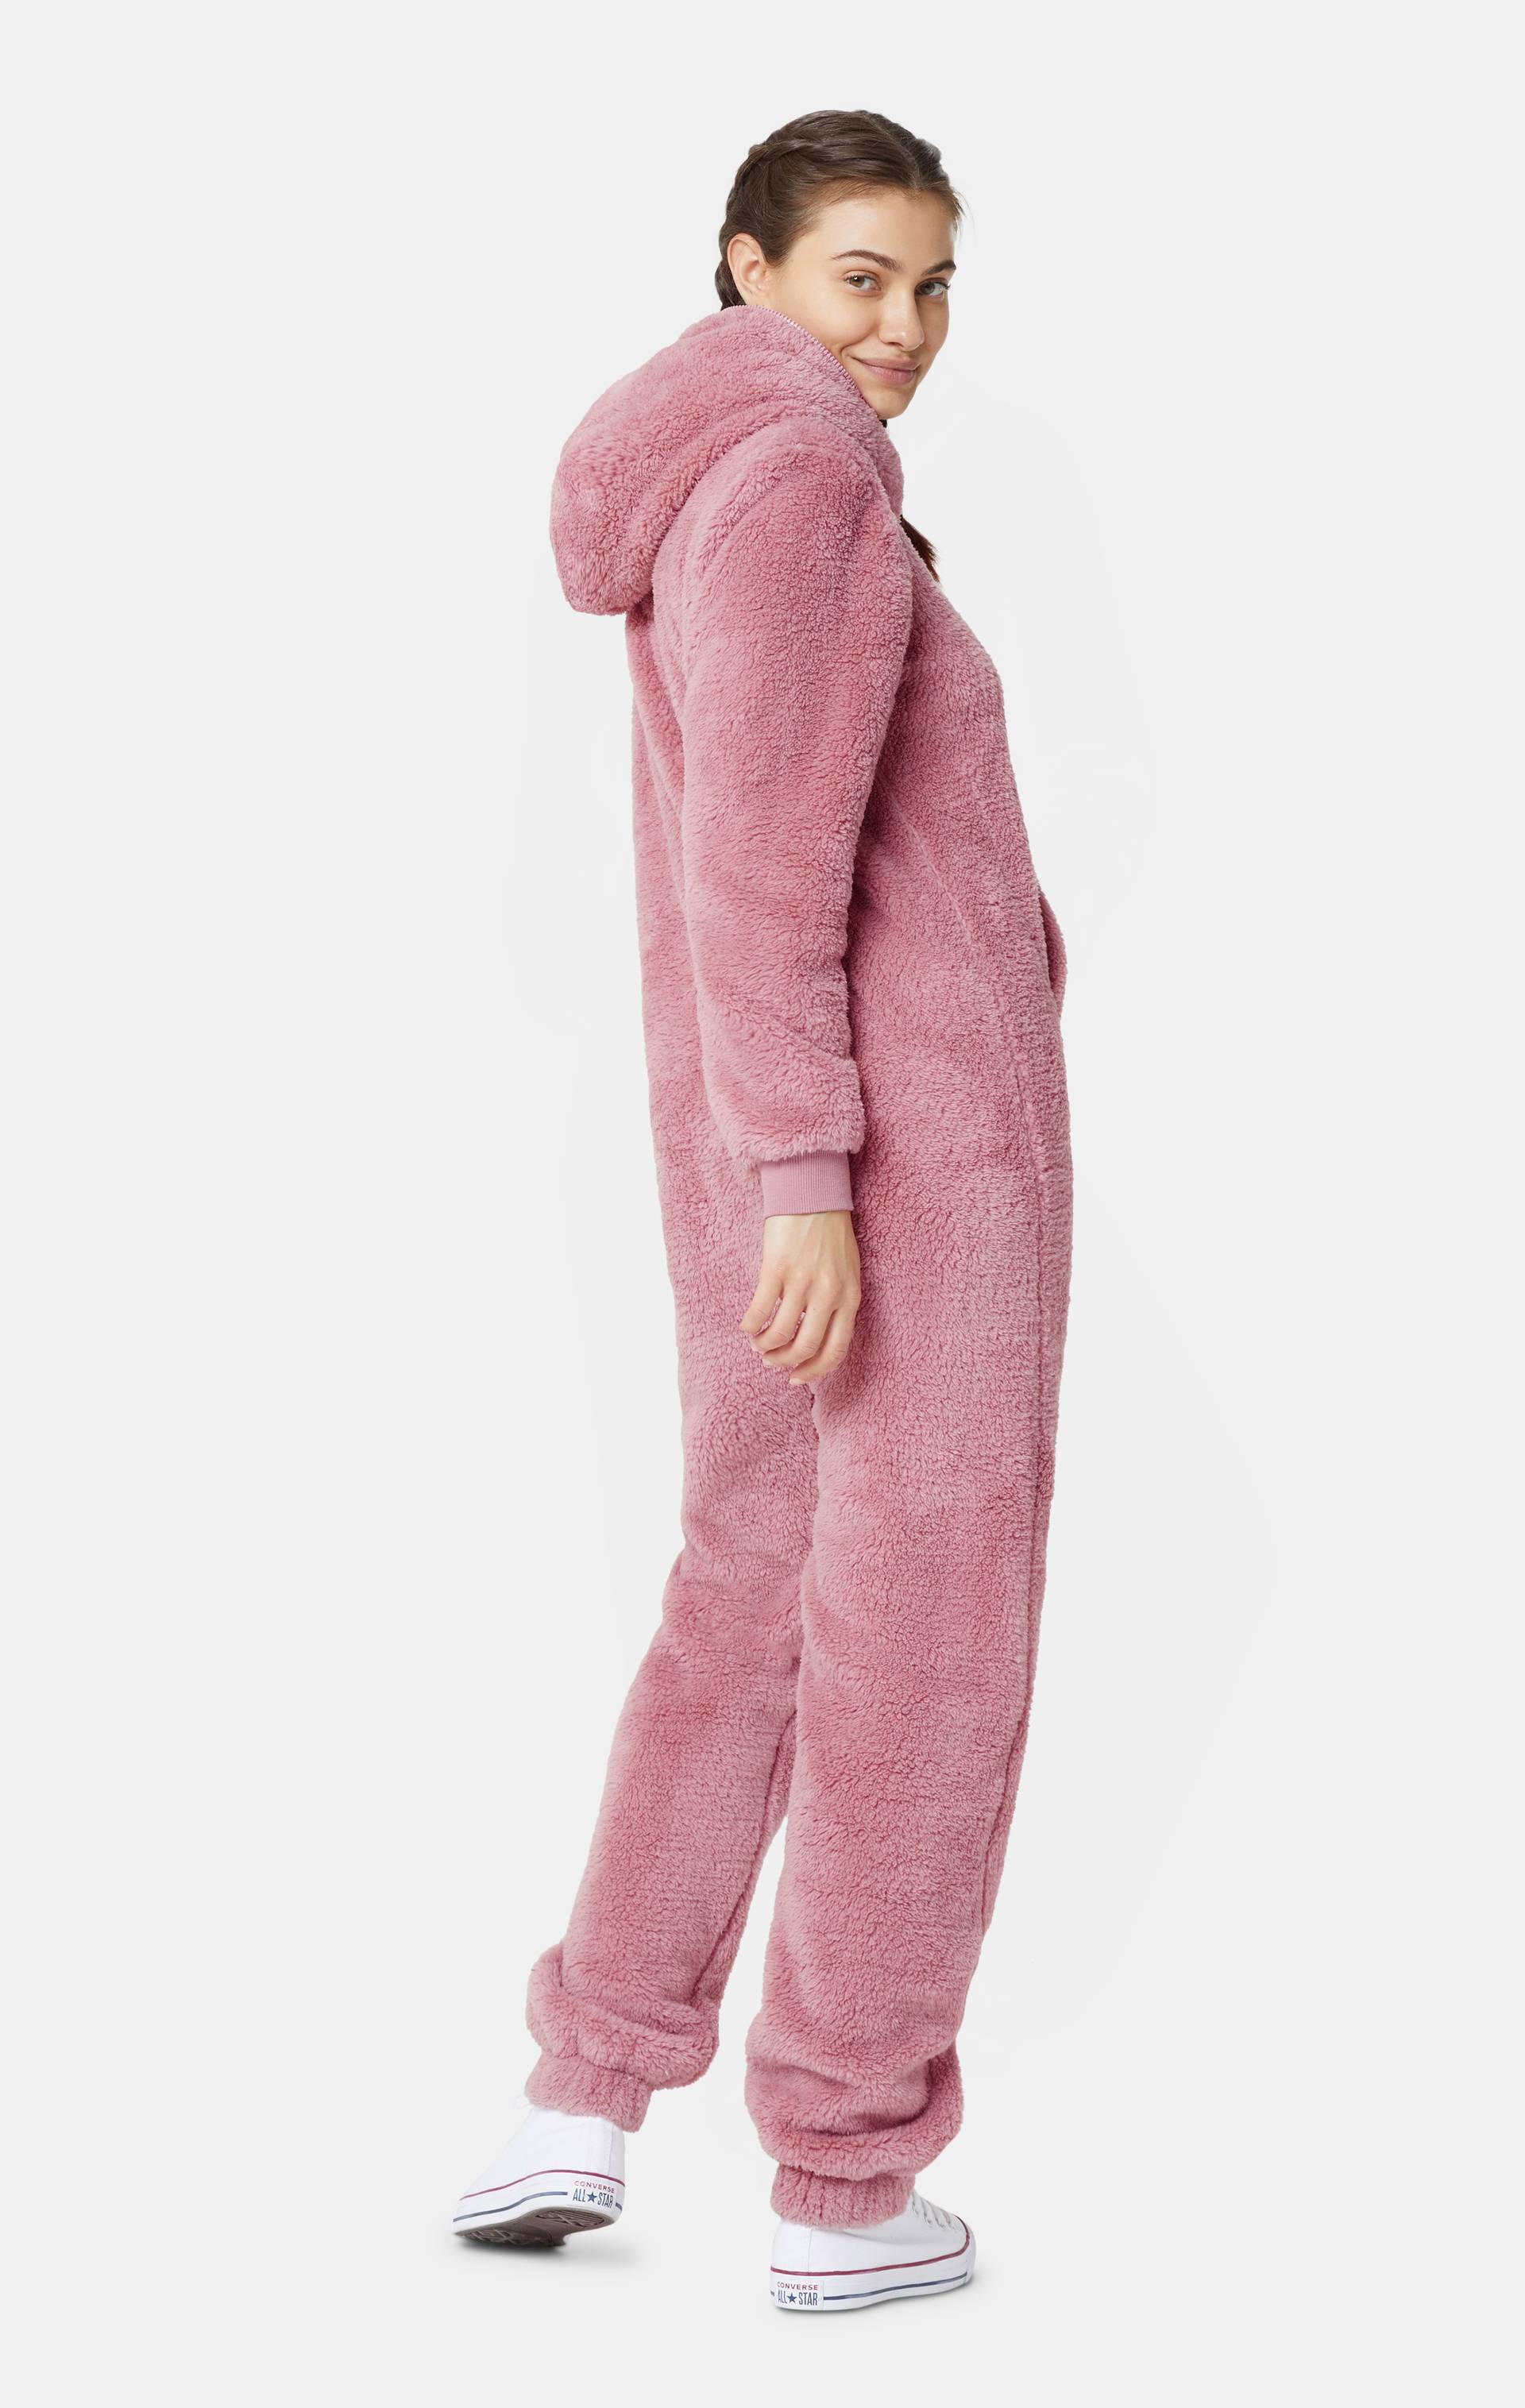 Onepiece The Puppy Jumpsuit Pink - 12